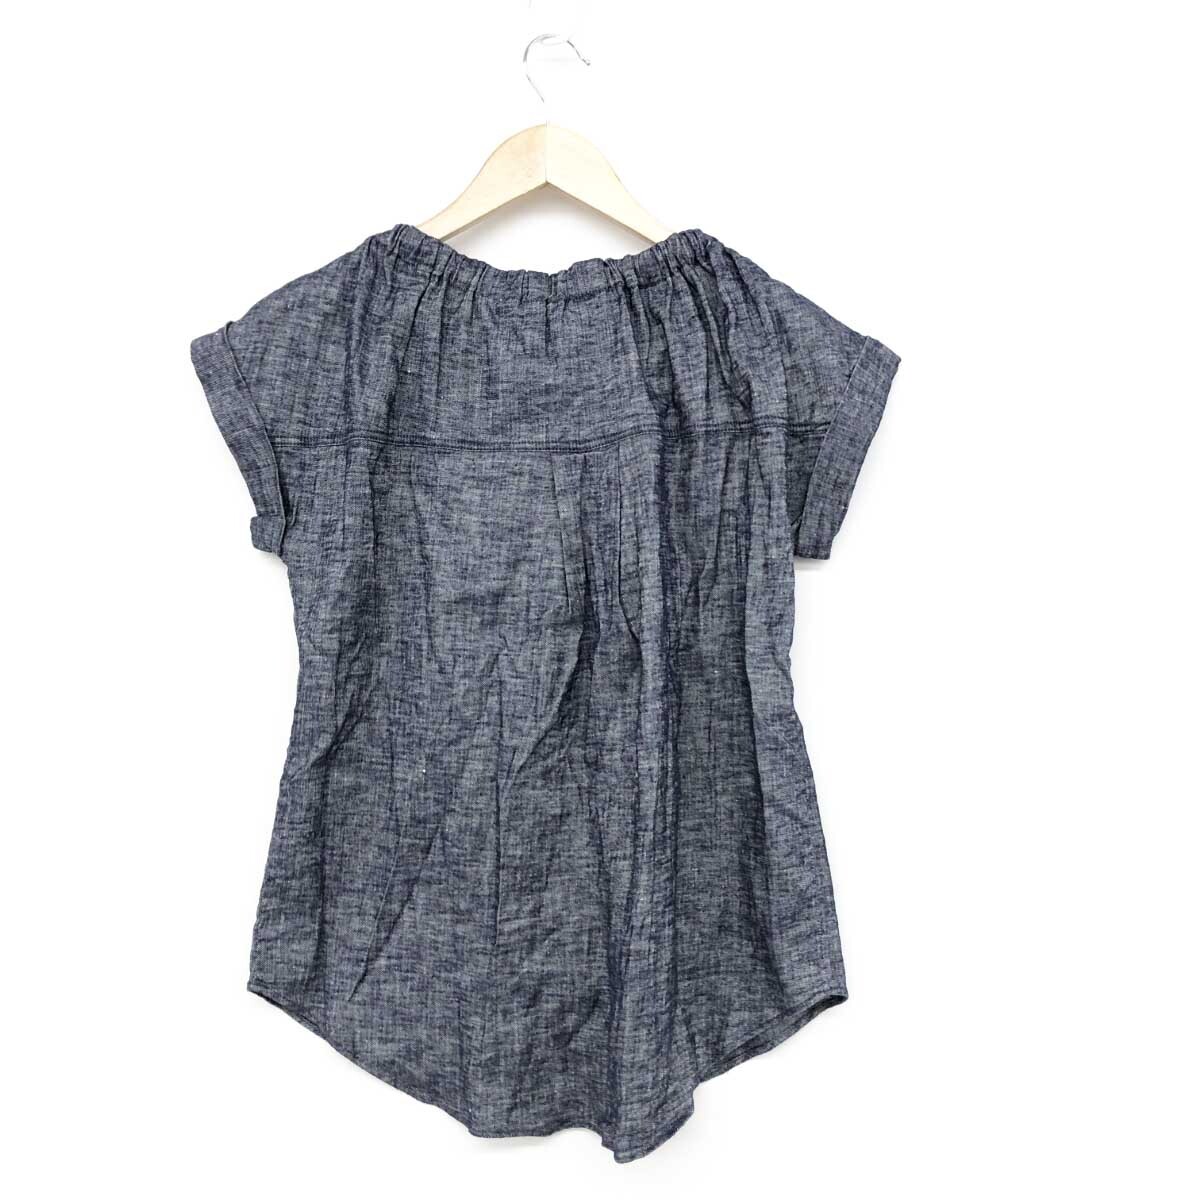  excellent *theory theory short sleeves blouse size P* navy lady's tops ribbon Denim 